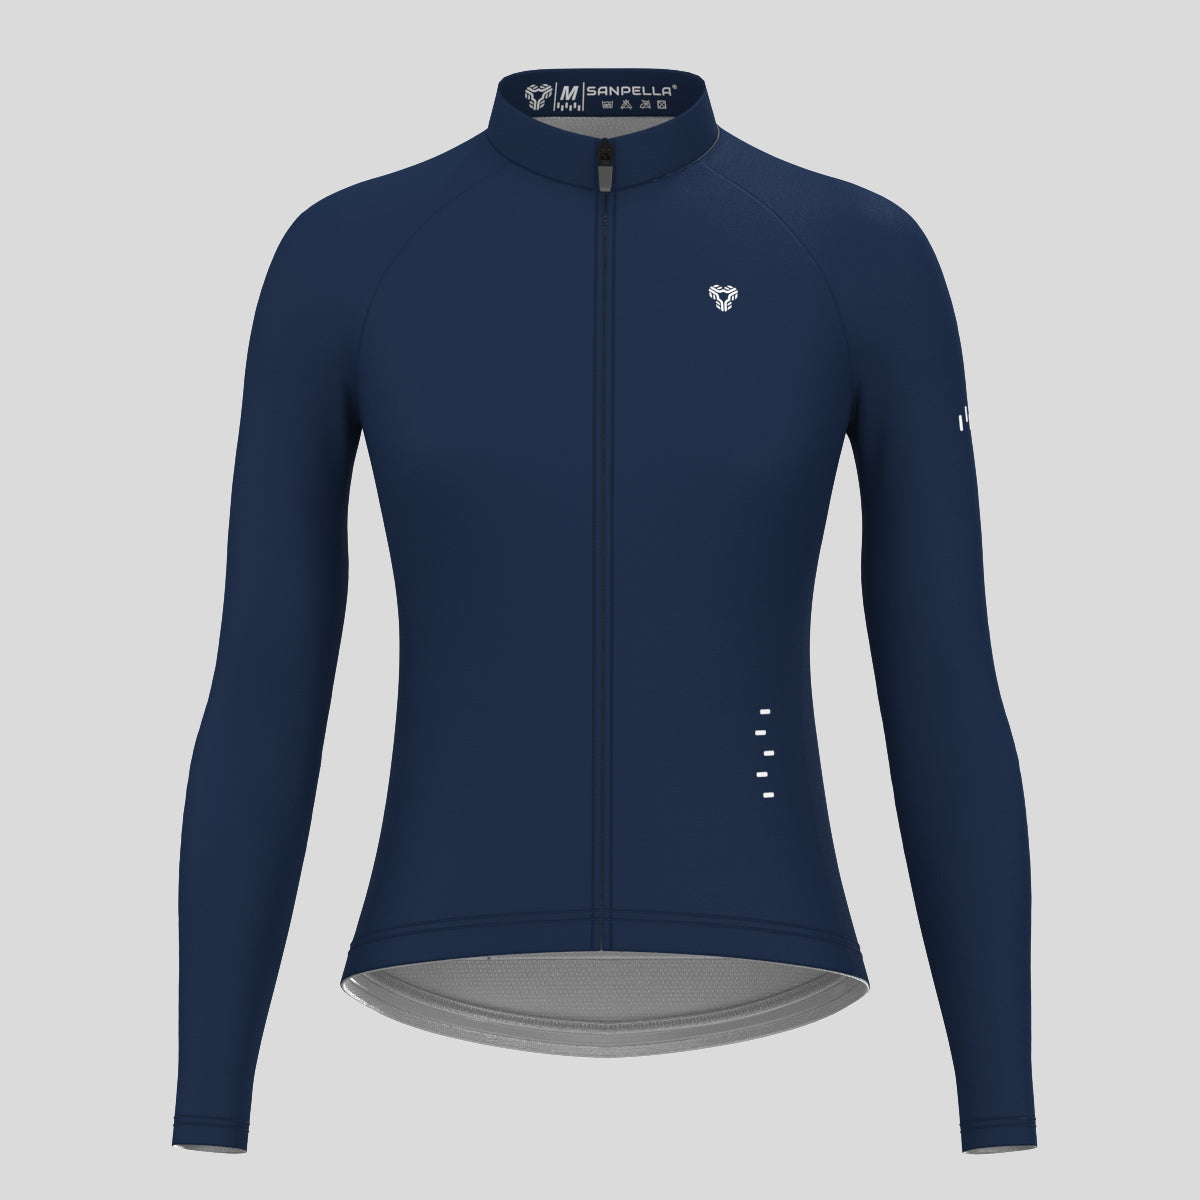 Women's Minimal Solid LS Cycling Jersey - Navy